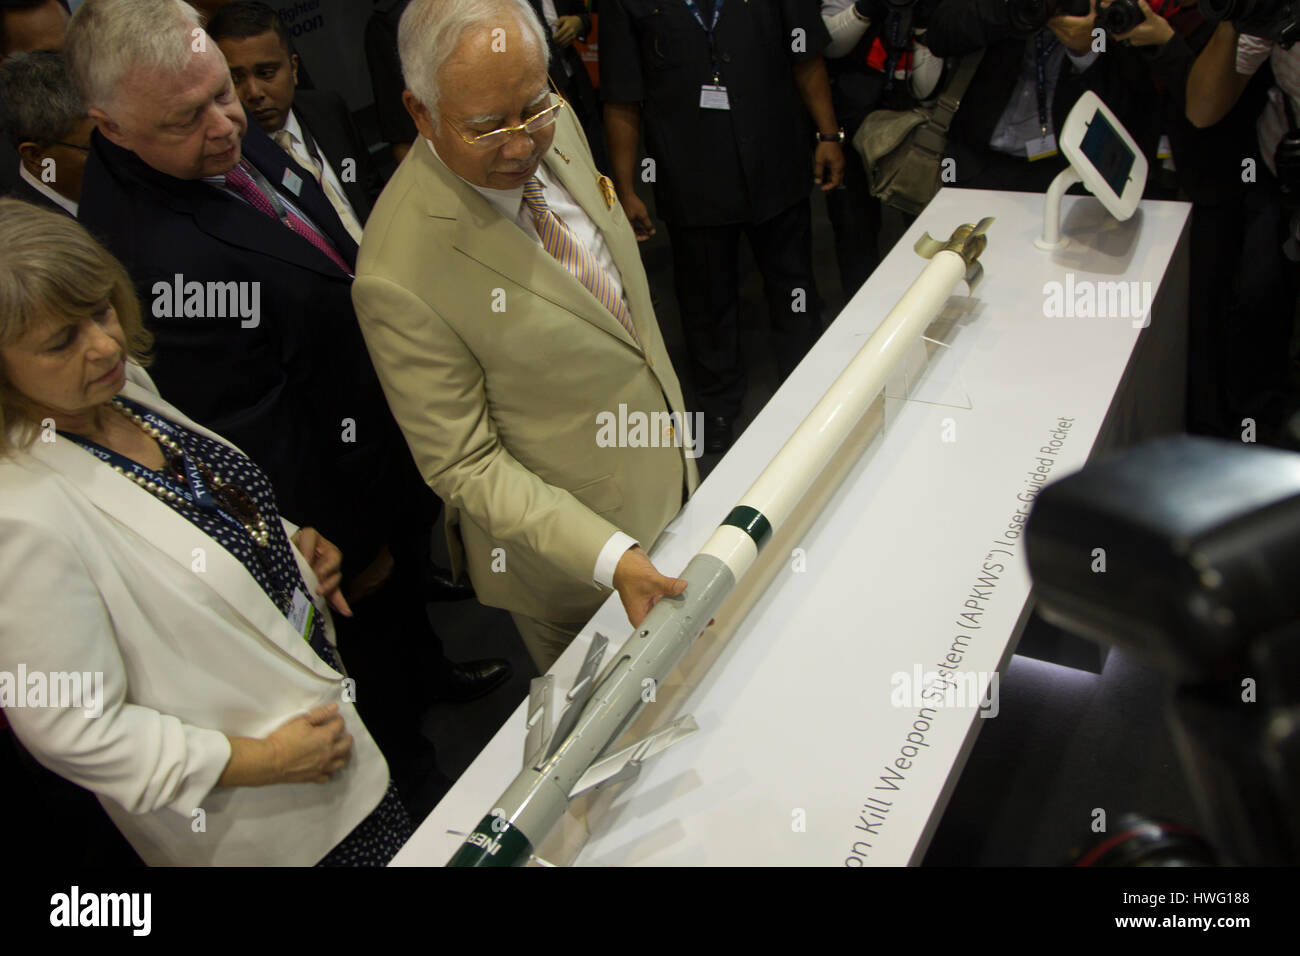 Langkawi, Malaysia. 21st Mar, 2017. Malaysian Prime Minister Najib Razak visits exhibitors in conjunction with LIMA Expo Credit: Chung Jin Mac/Alamy Live News Stock Photo